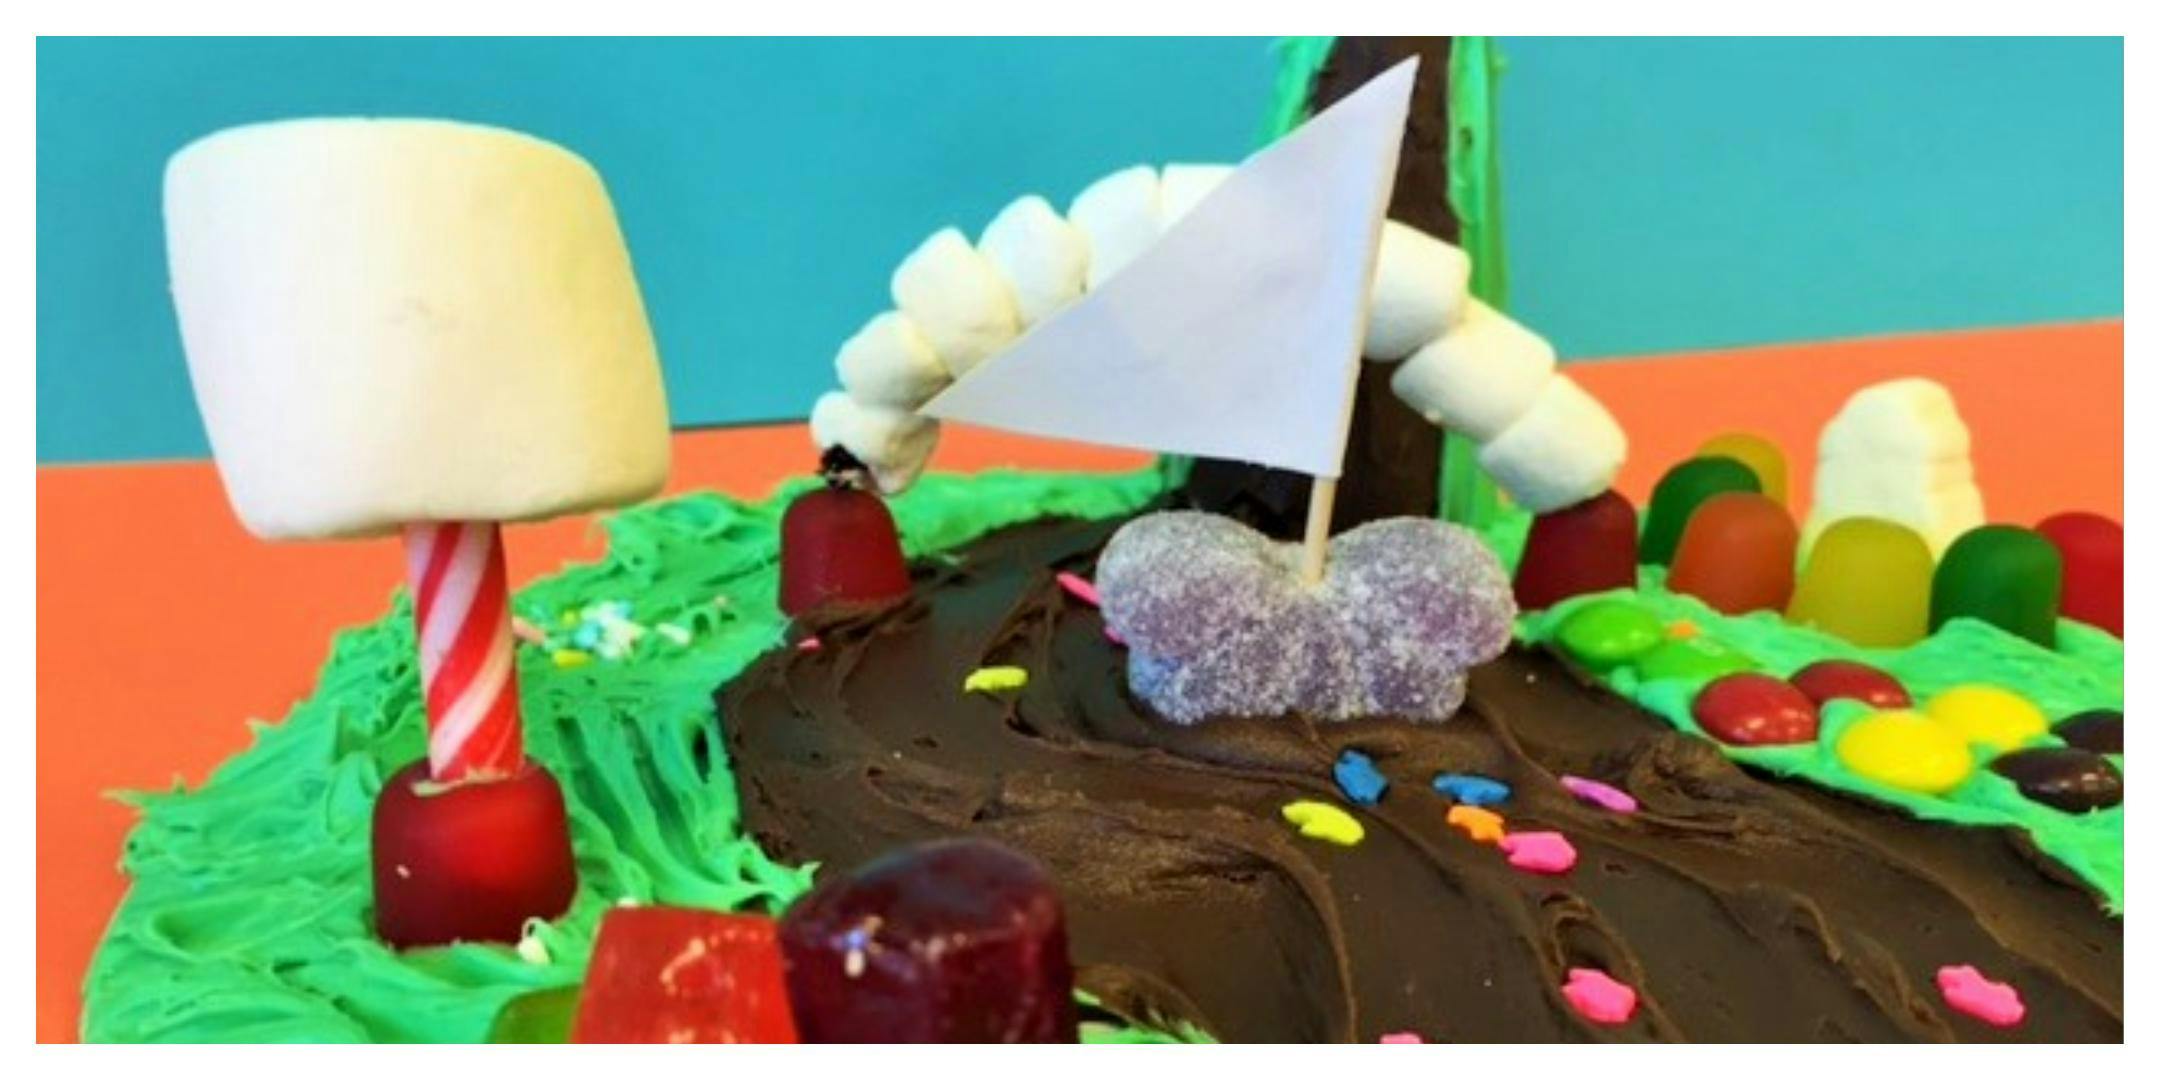 Willy Wonka’s Candy Crafts Summer Camp (5-12 Years)